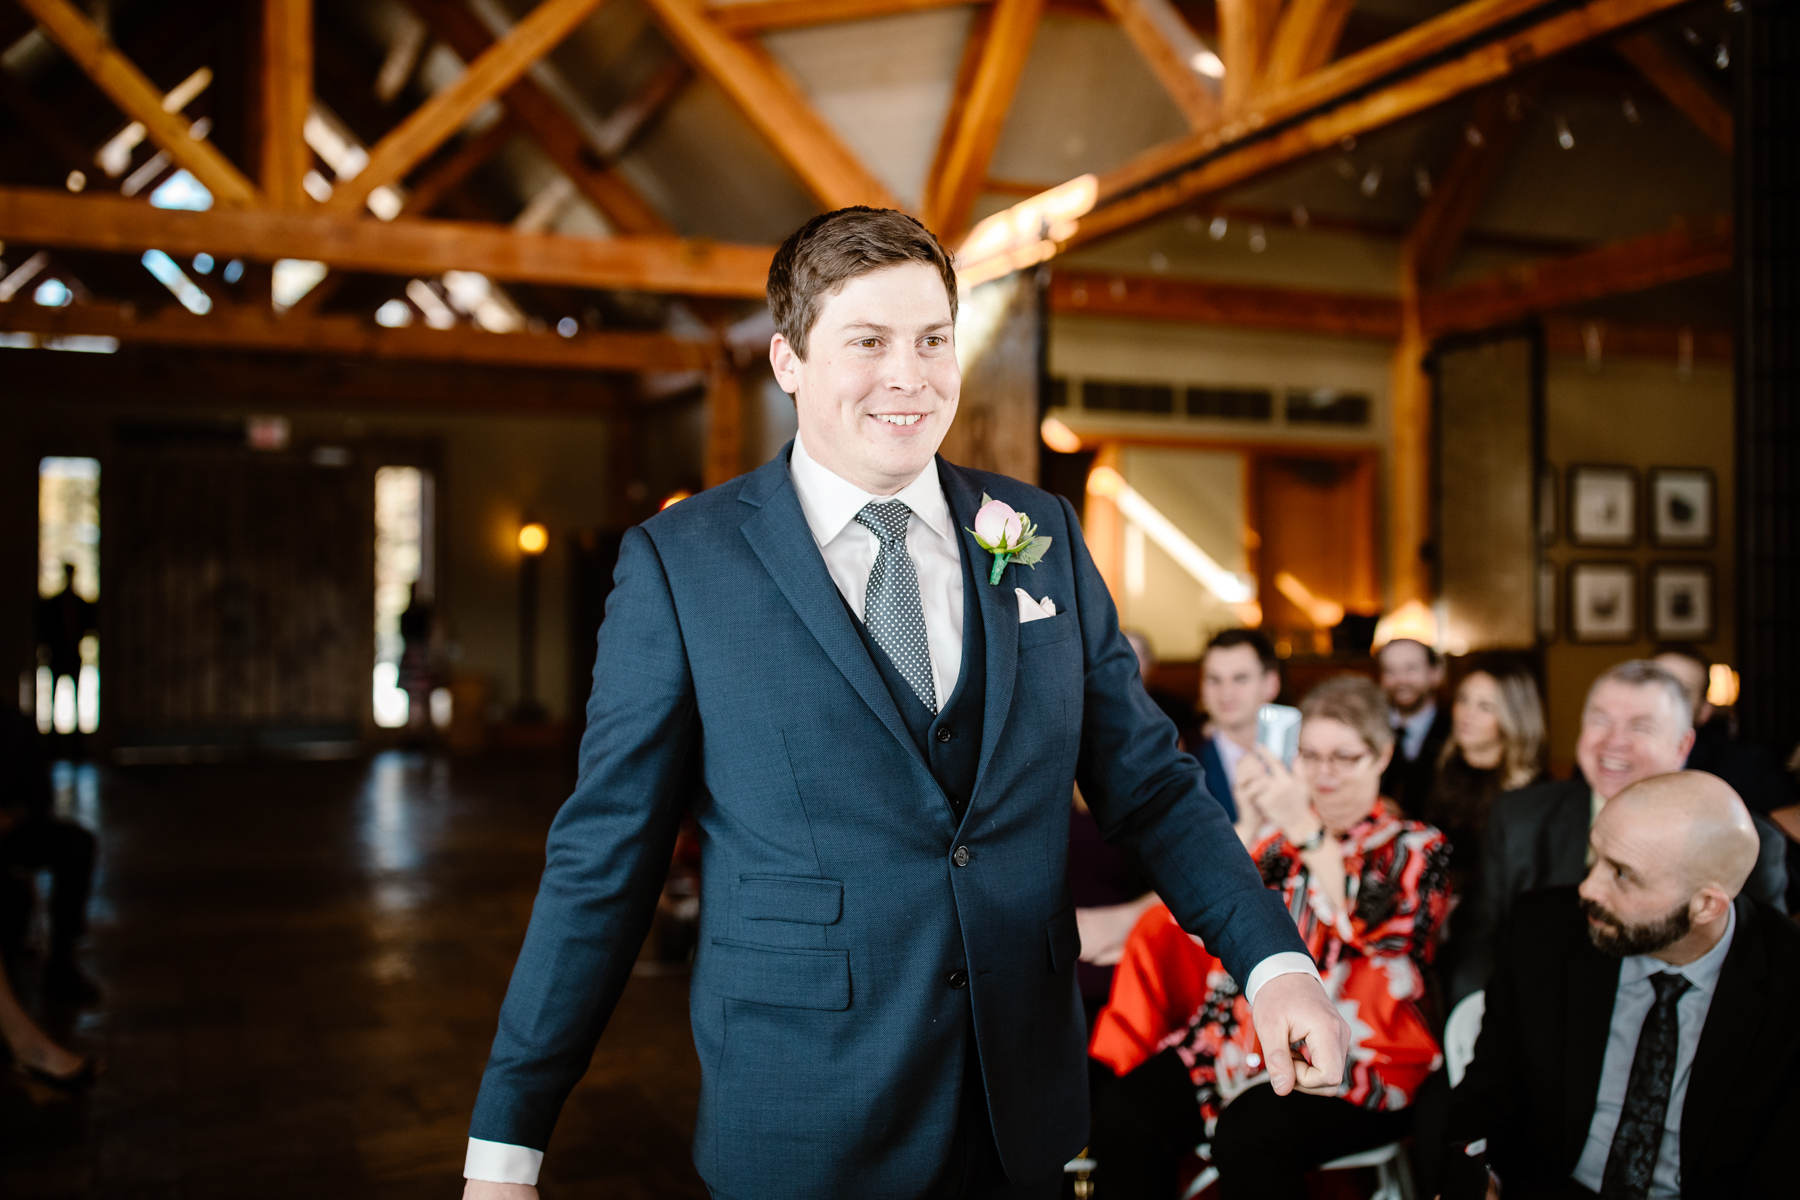 Invermere Wedding Photographers at Eagle Ranch and Panorama Ski Resort - Image 19